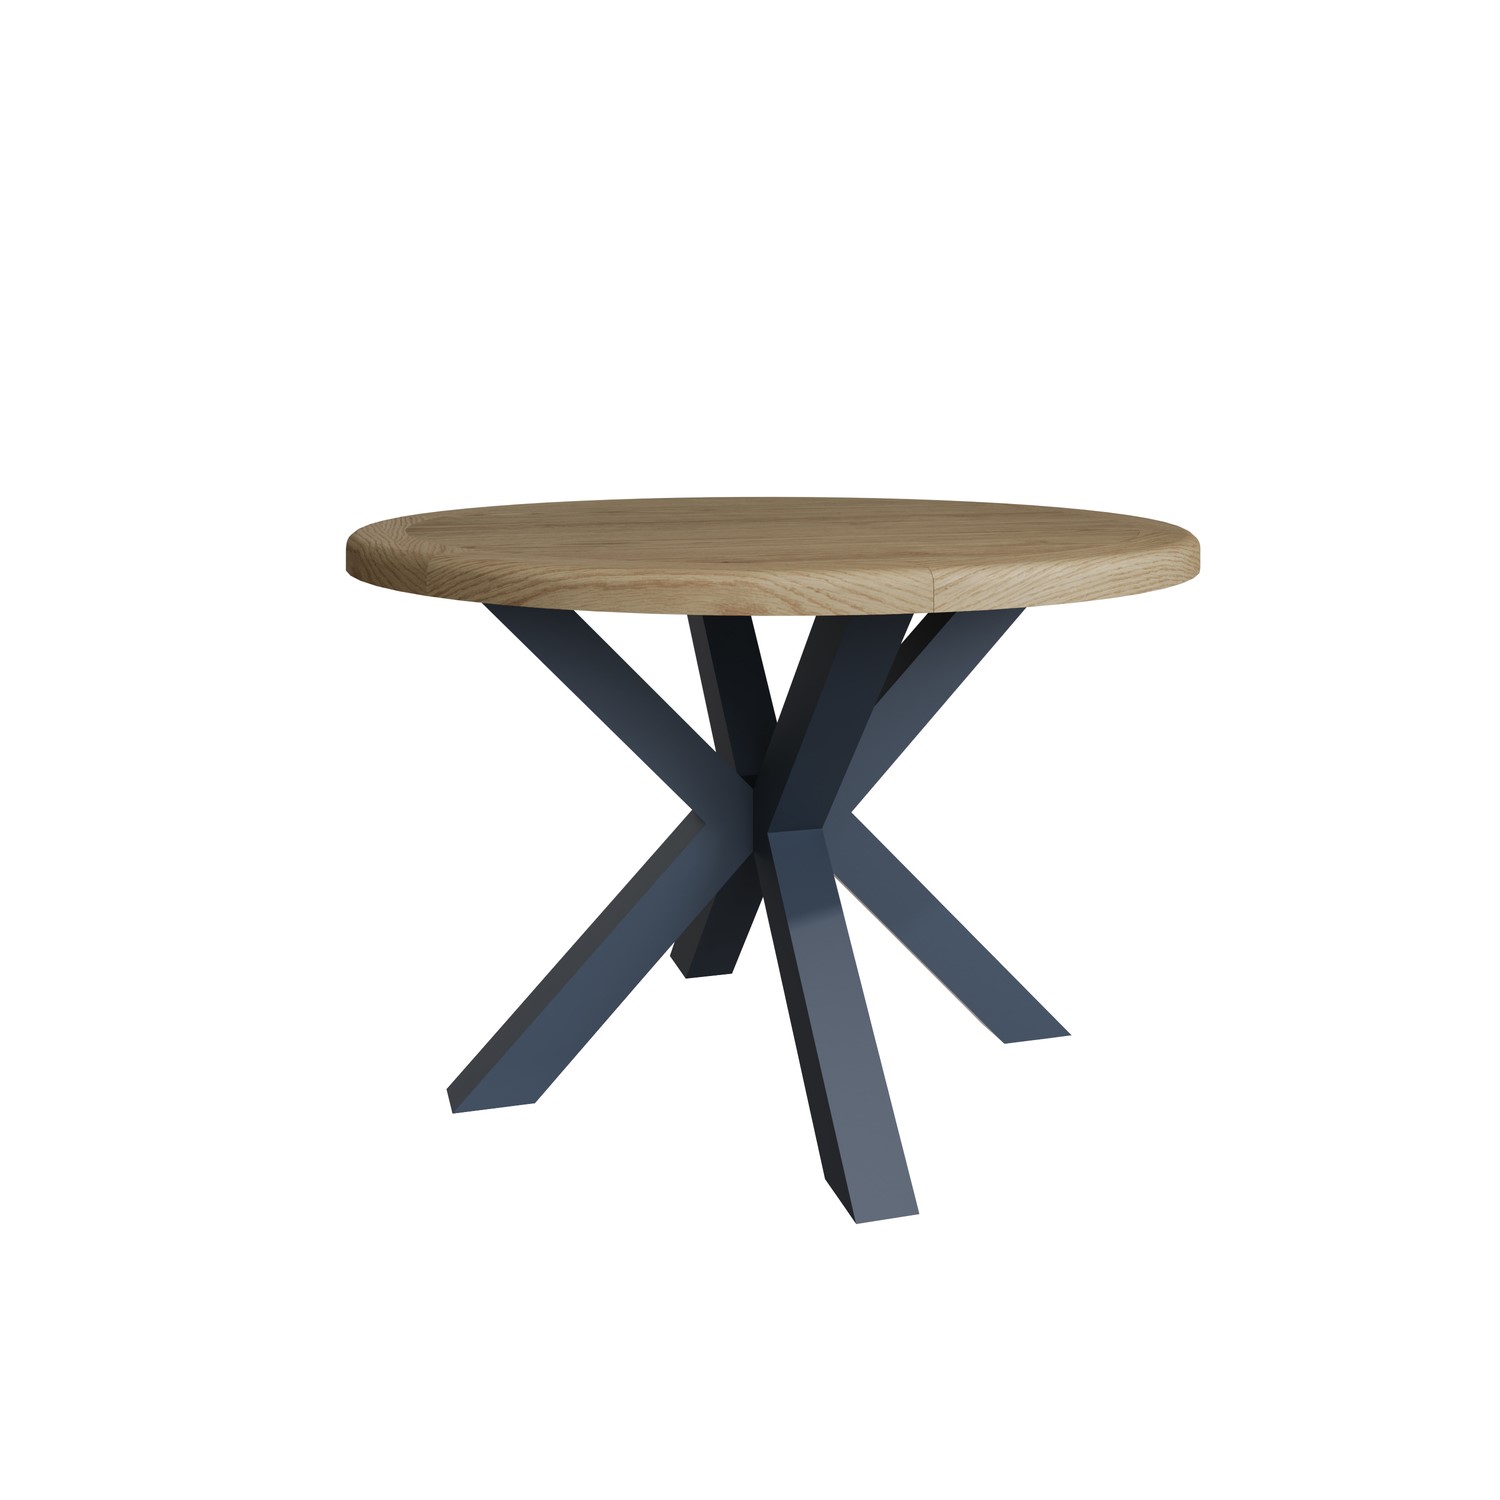 Photo of Oak & blue small round dining table 120cm